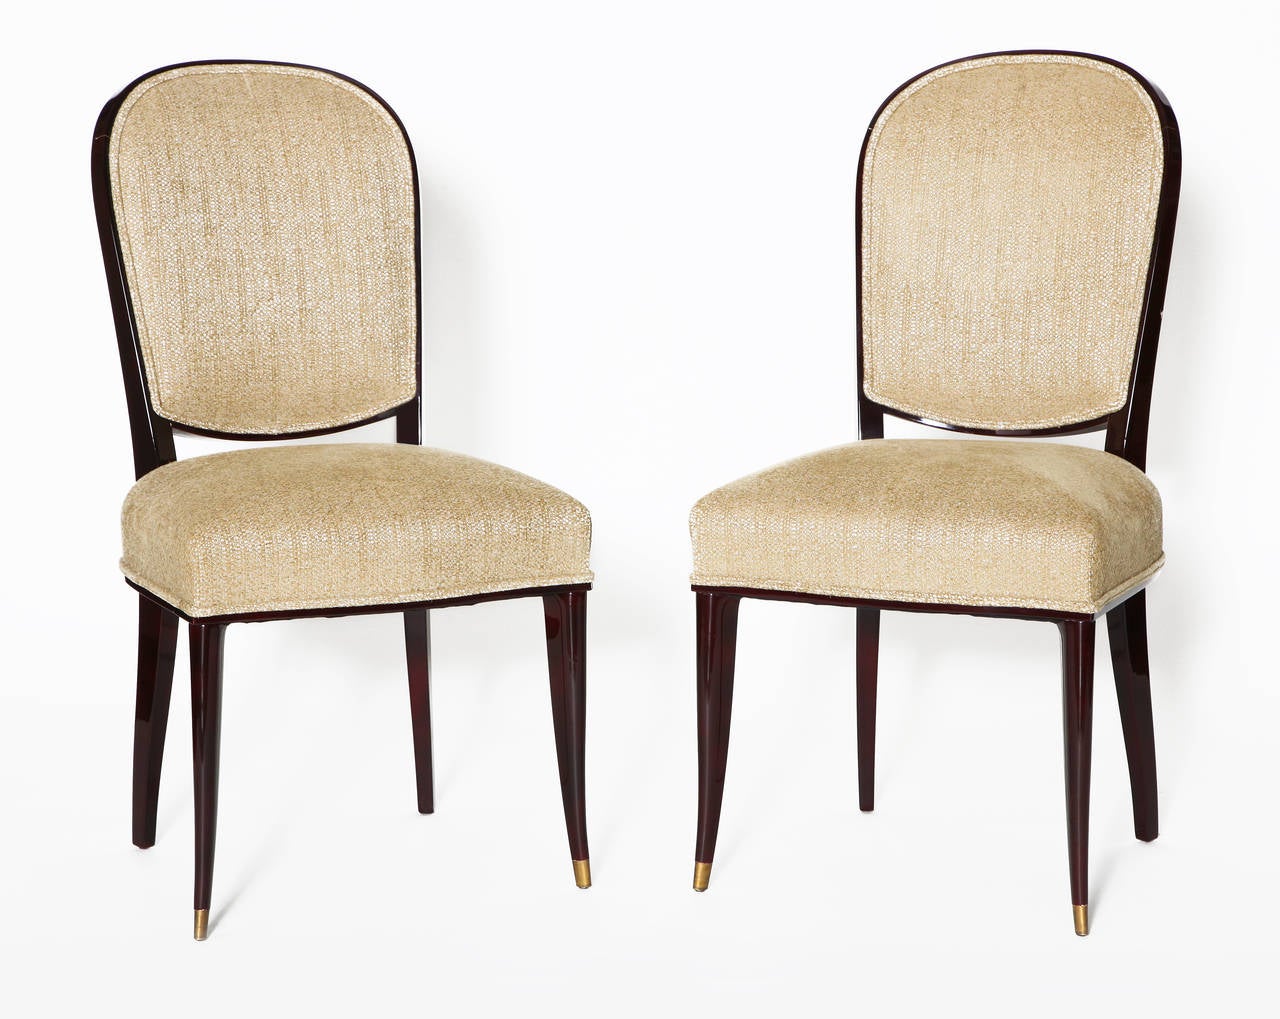 Set of ten dining chairs in original Beka lacquer by Sain and Tambute´, with gilt bronze sabots. Each chair is numbered: 33341 through 33348

For an illustration of a similar model, see Siriex, Franc¸oise. The House of Leleu. New York: Hudson